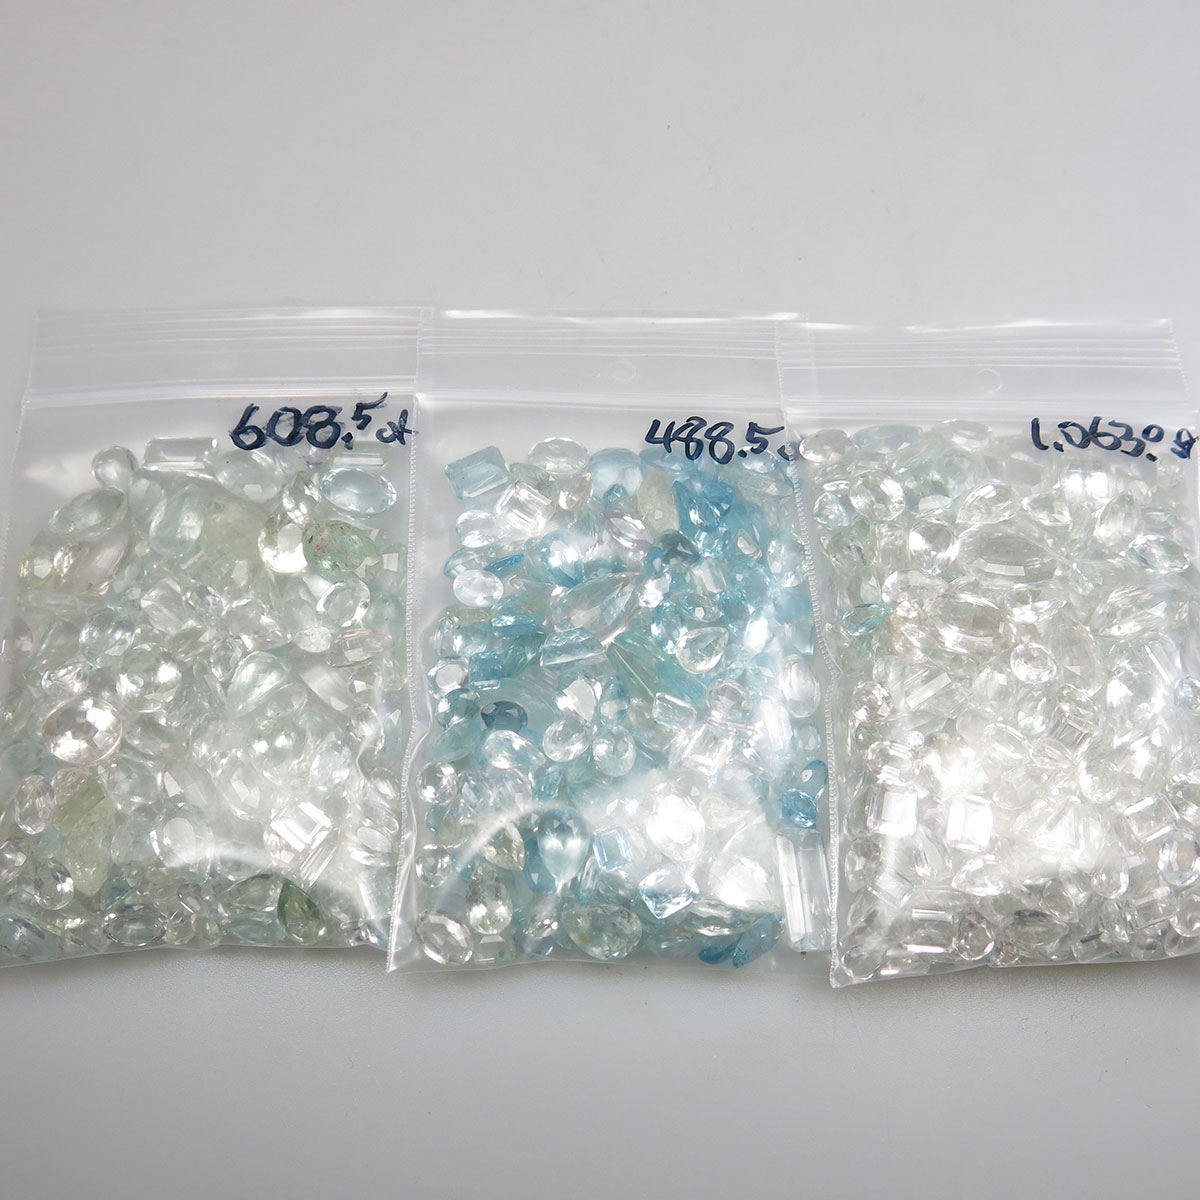 Large Quantity Of Unmounted Clear And Pale Blue Topaz, Beryl And Rock Crystal